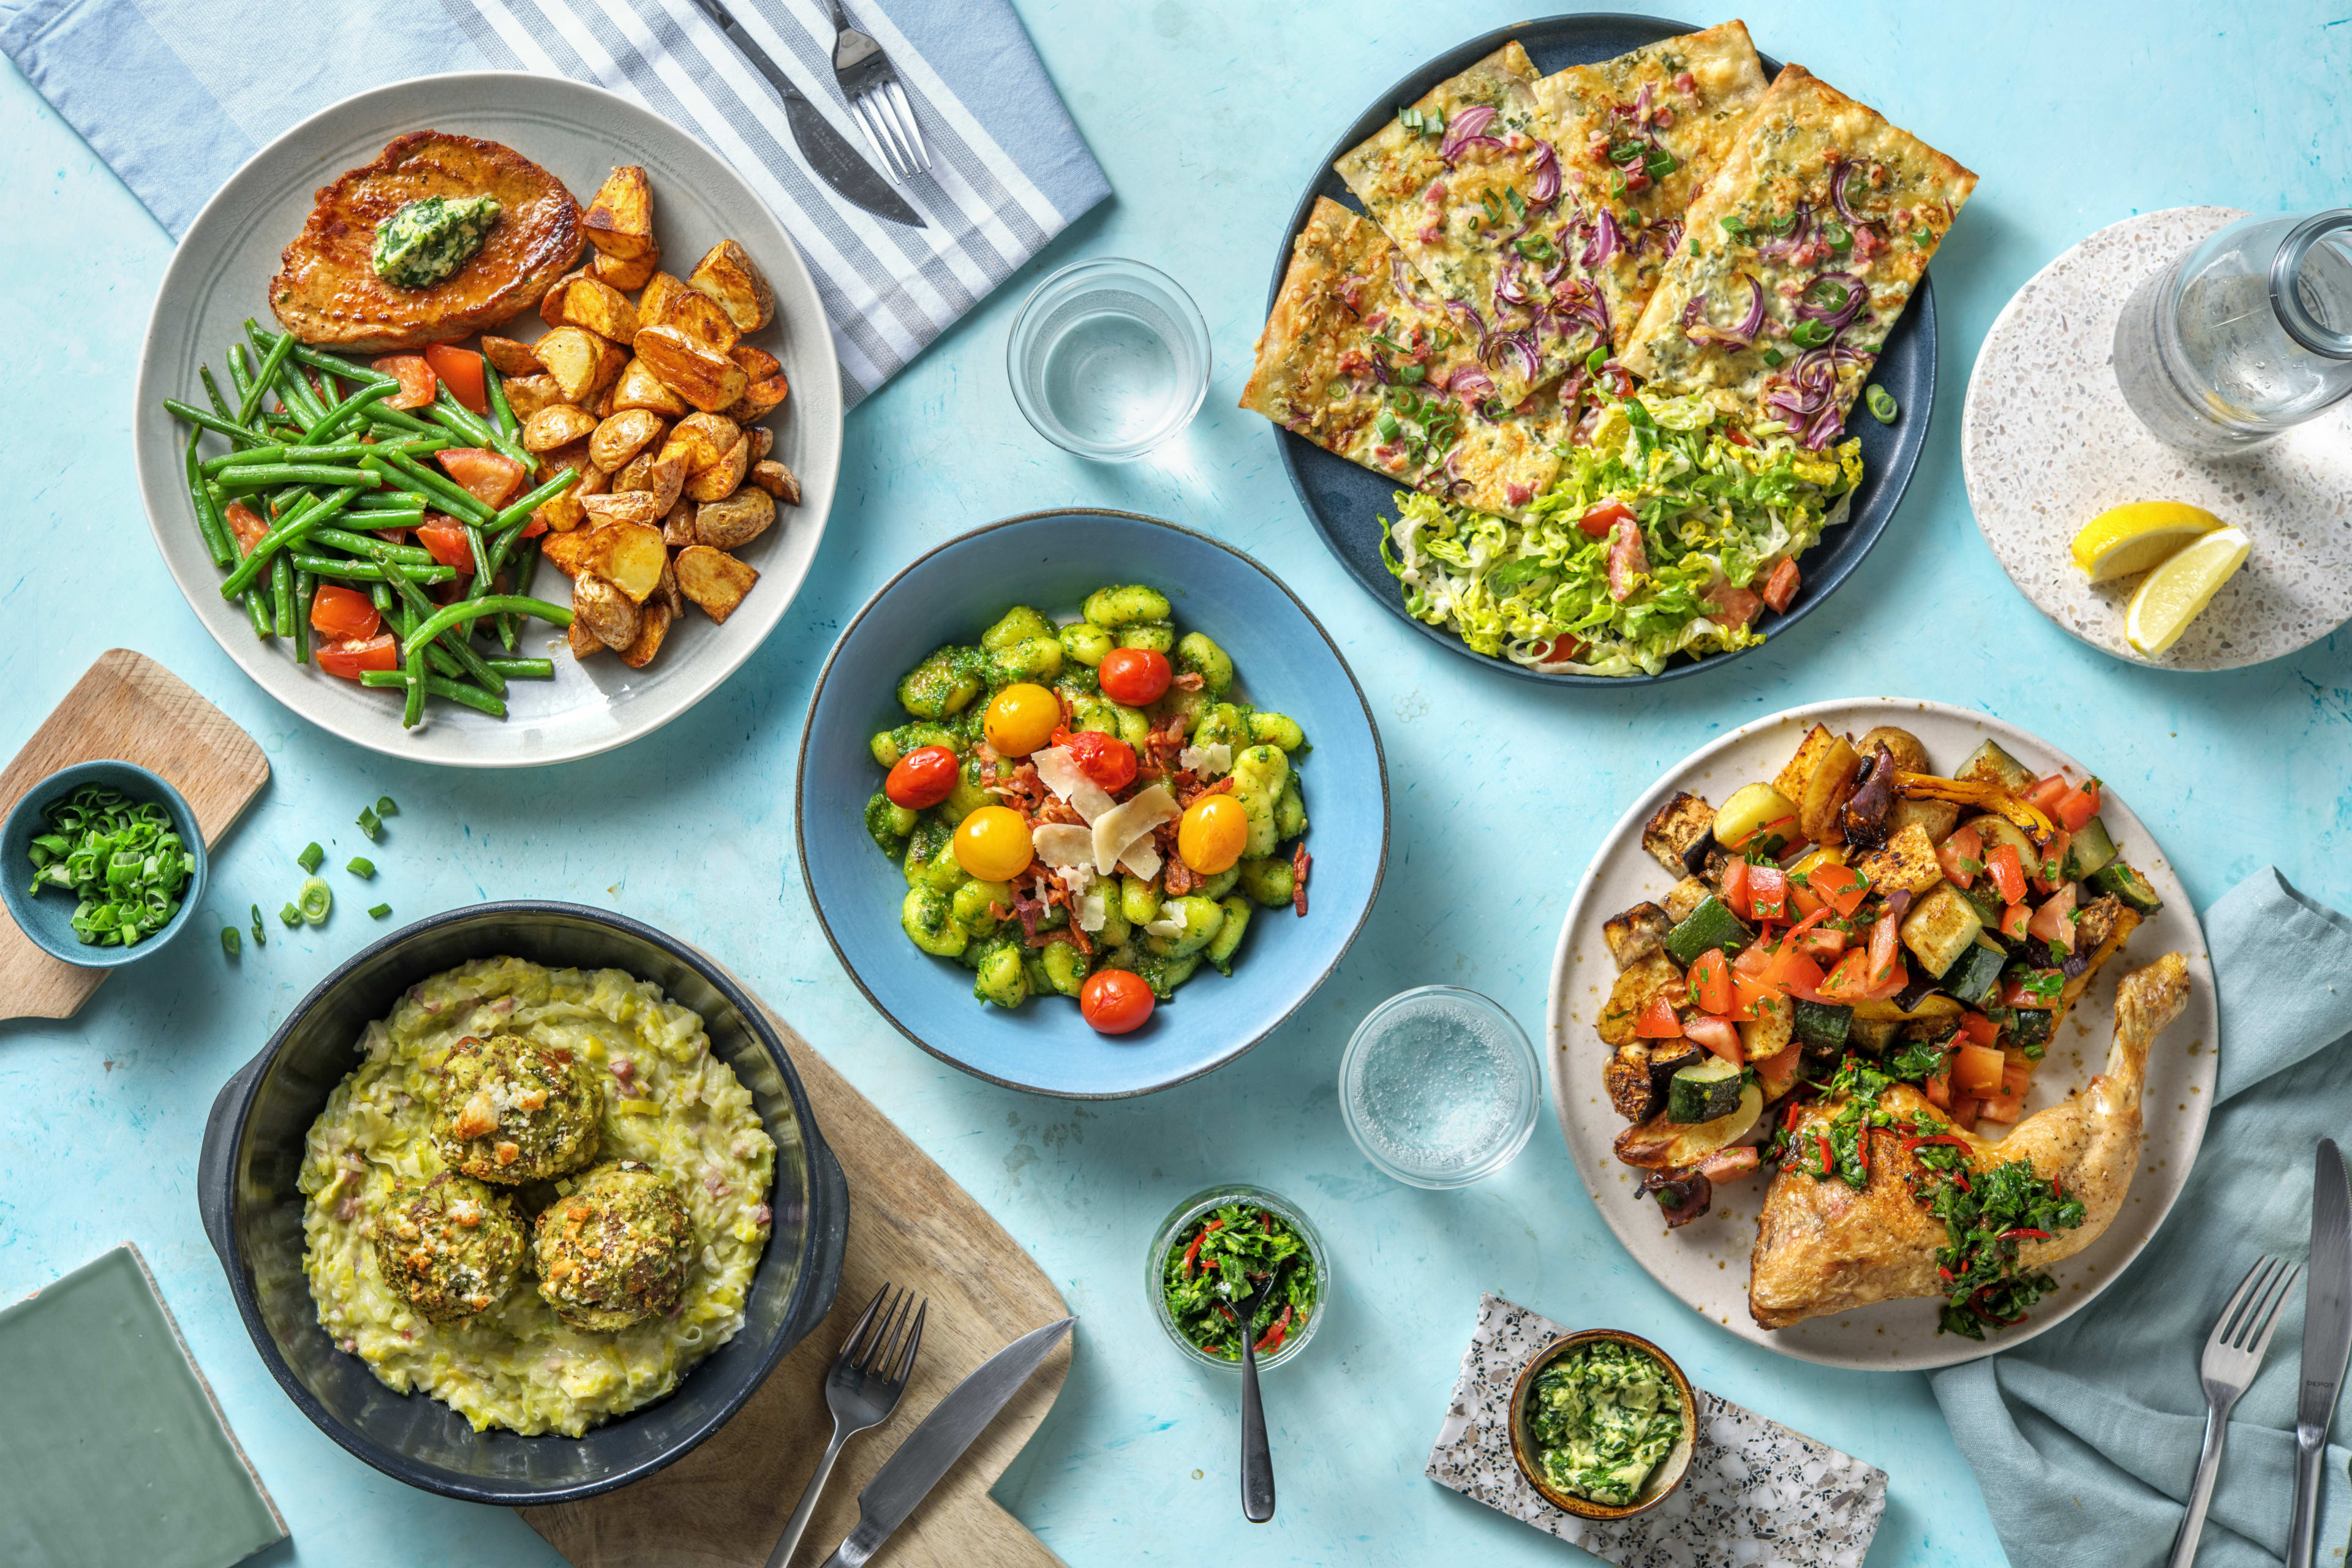 <h2>Make Flexitarianism even easier with a HelloFresh Food Box</h2>